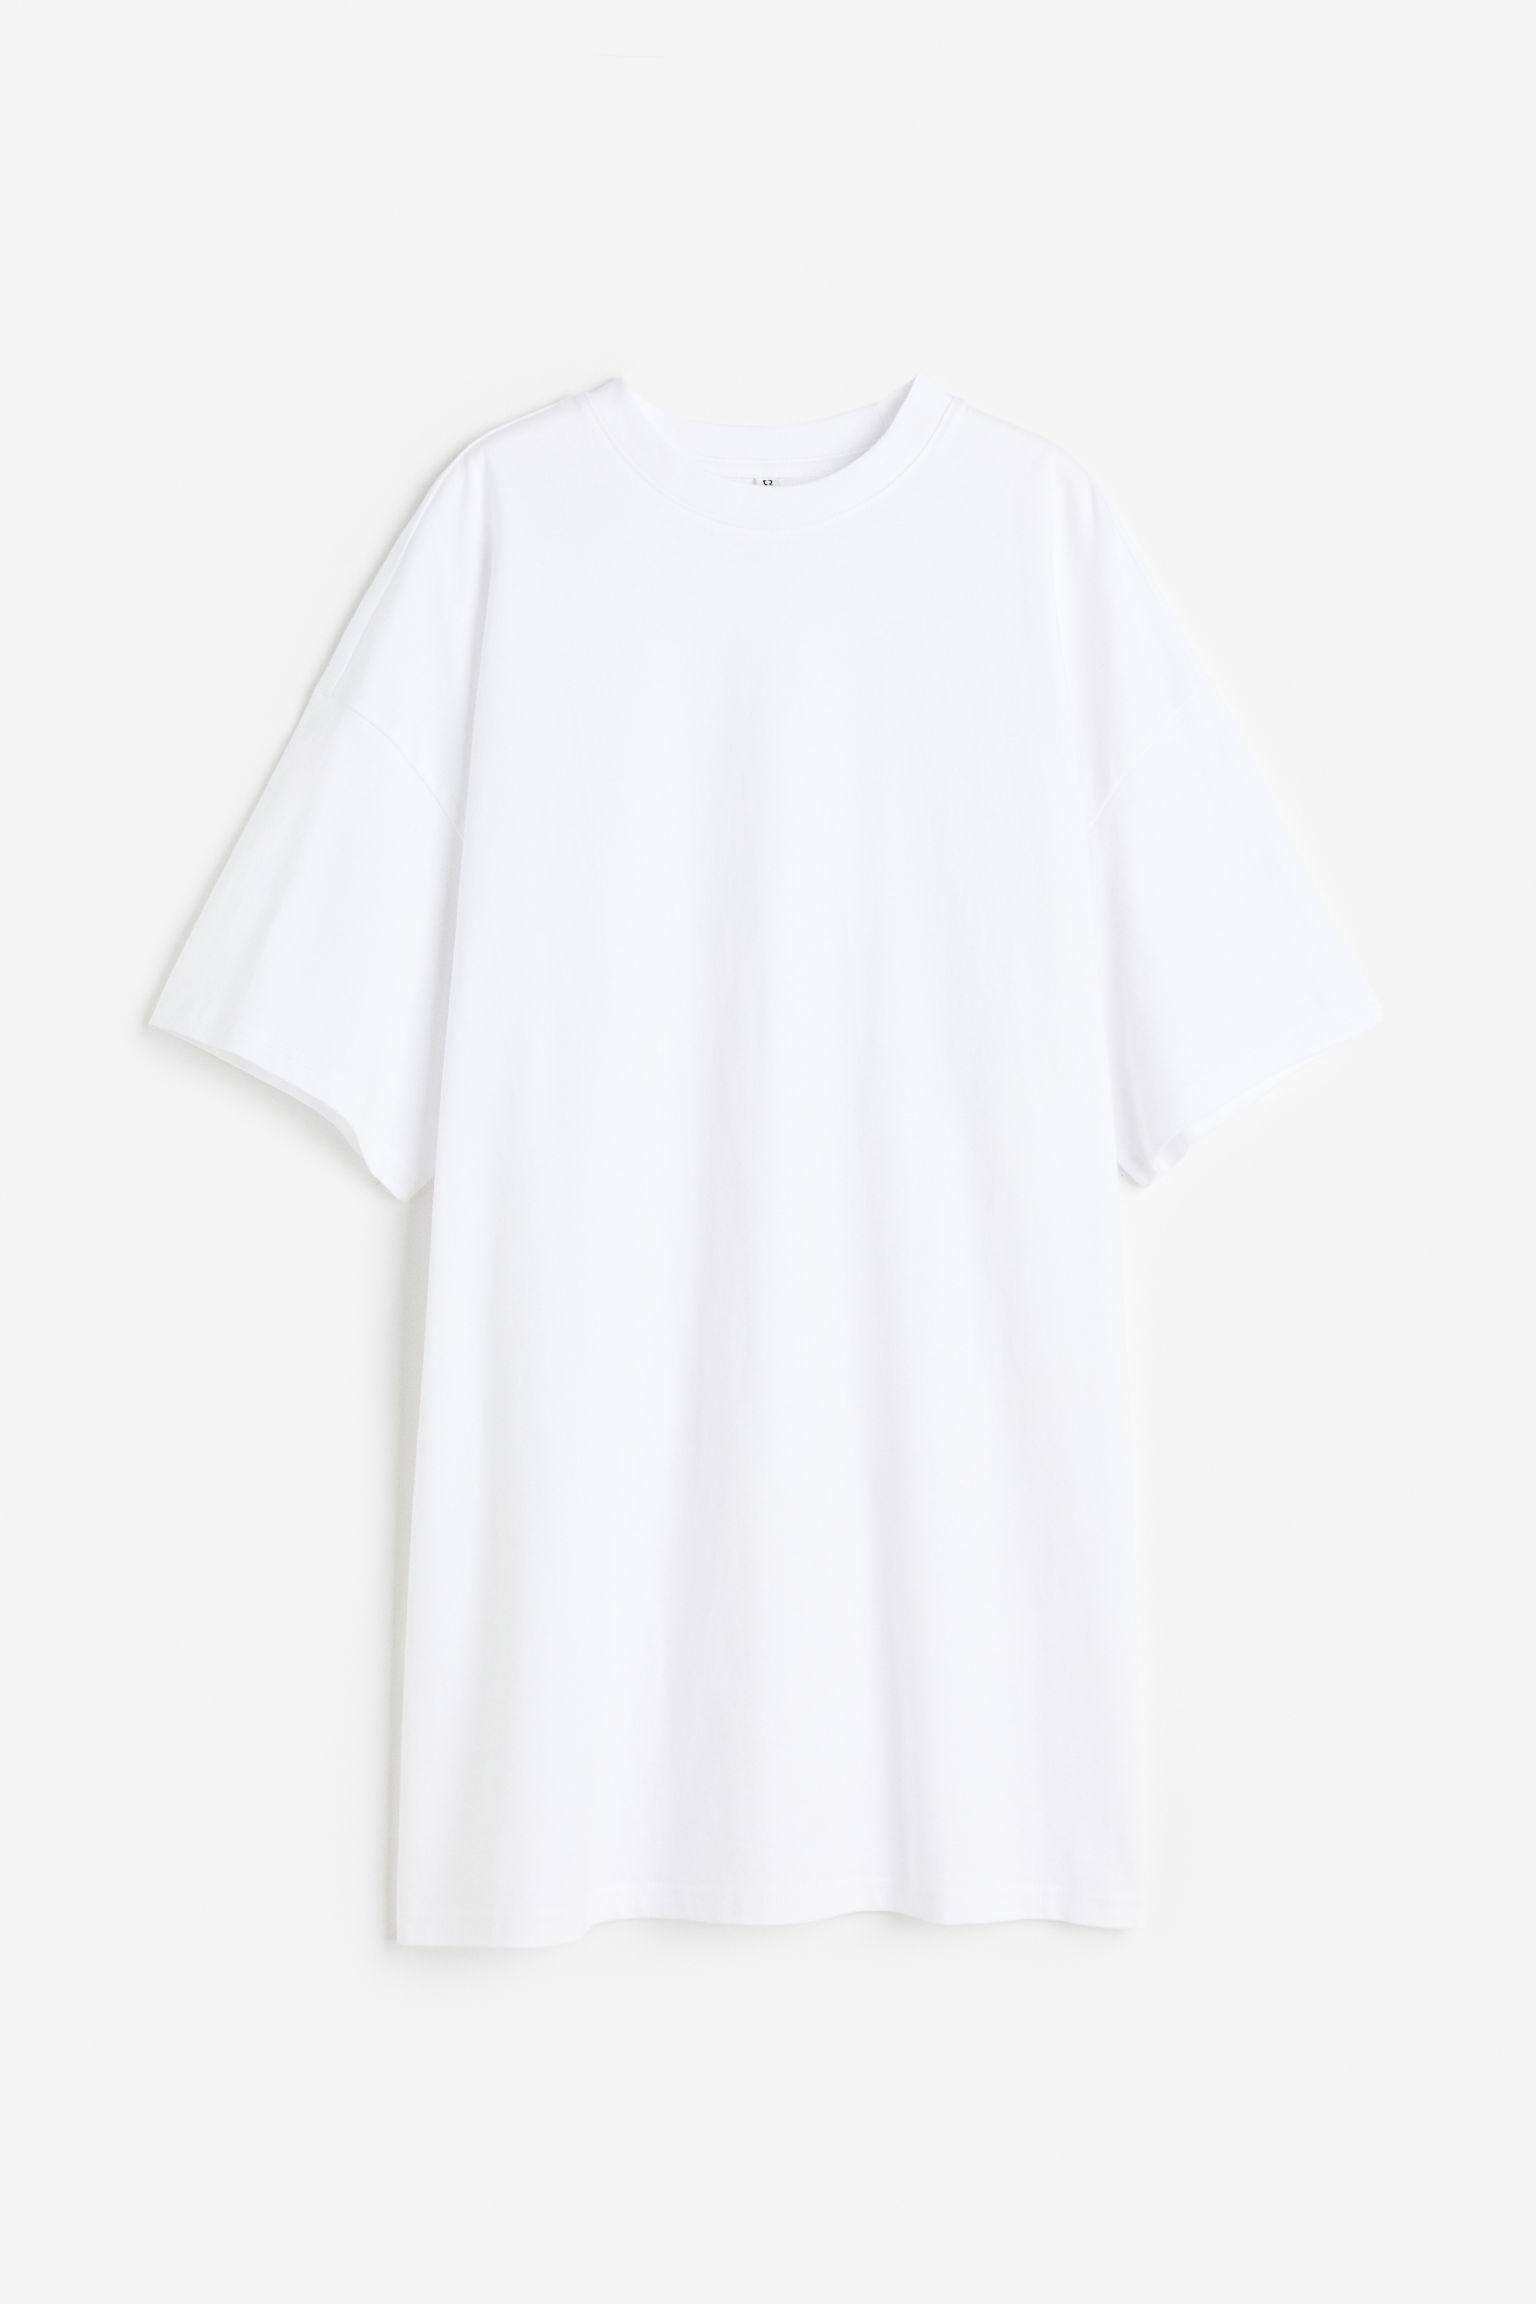 H&M Oversized T-shirt Dress in White | Lyst Canada